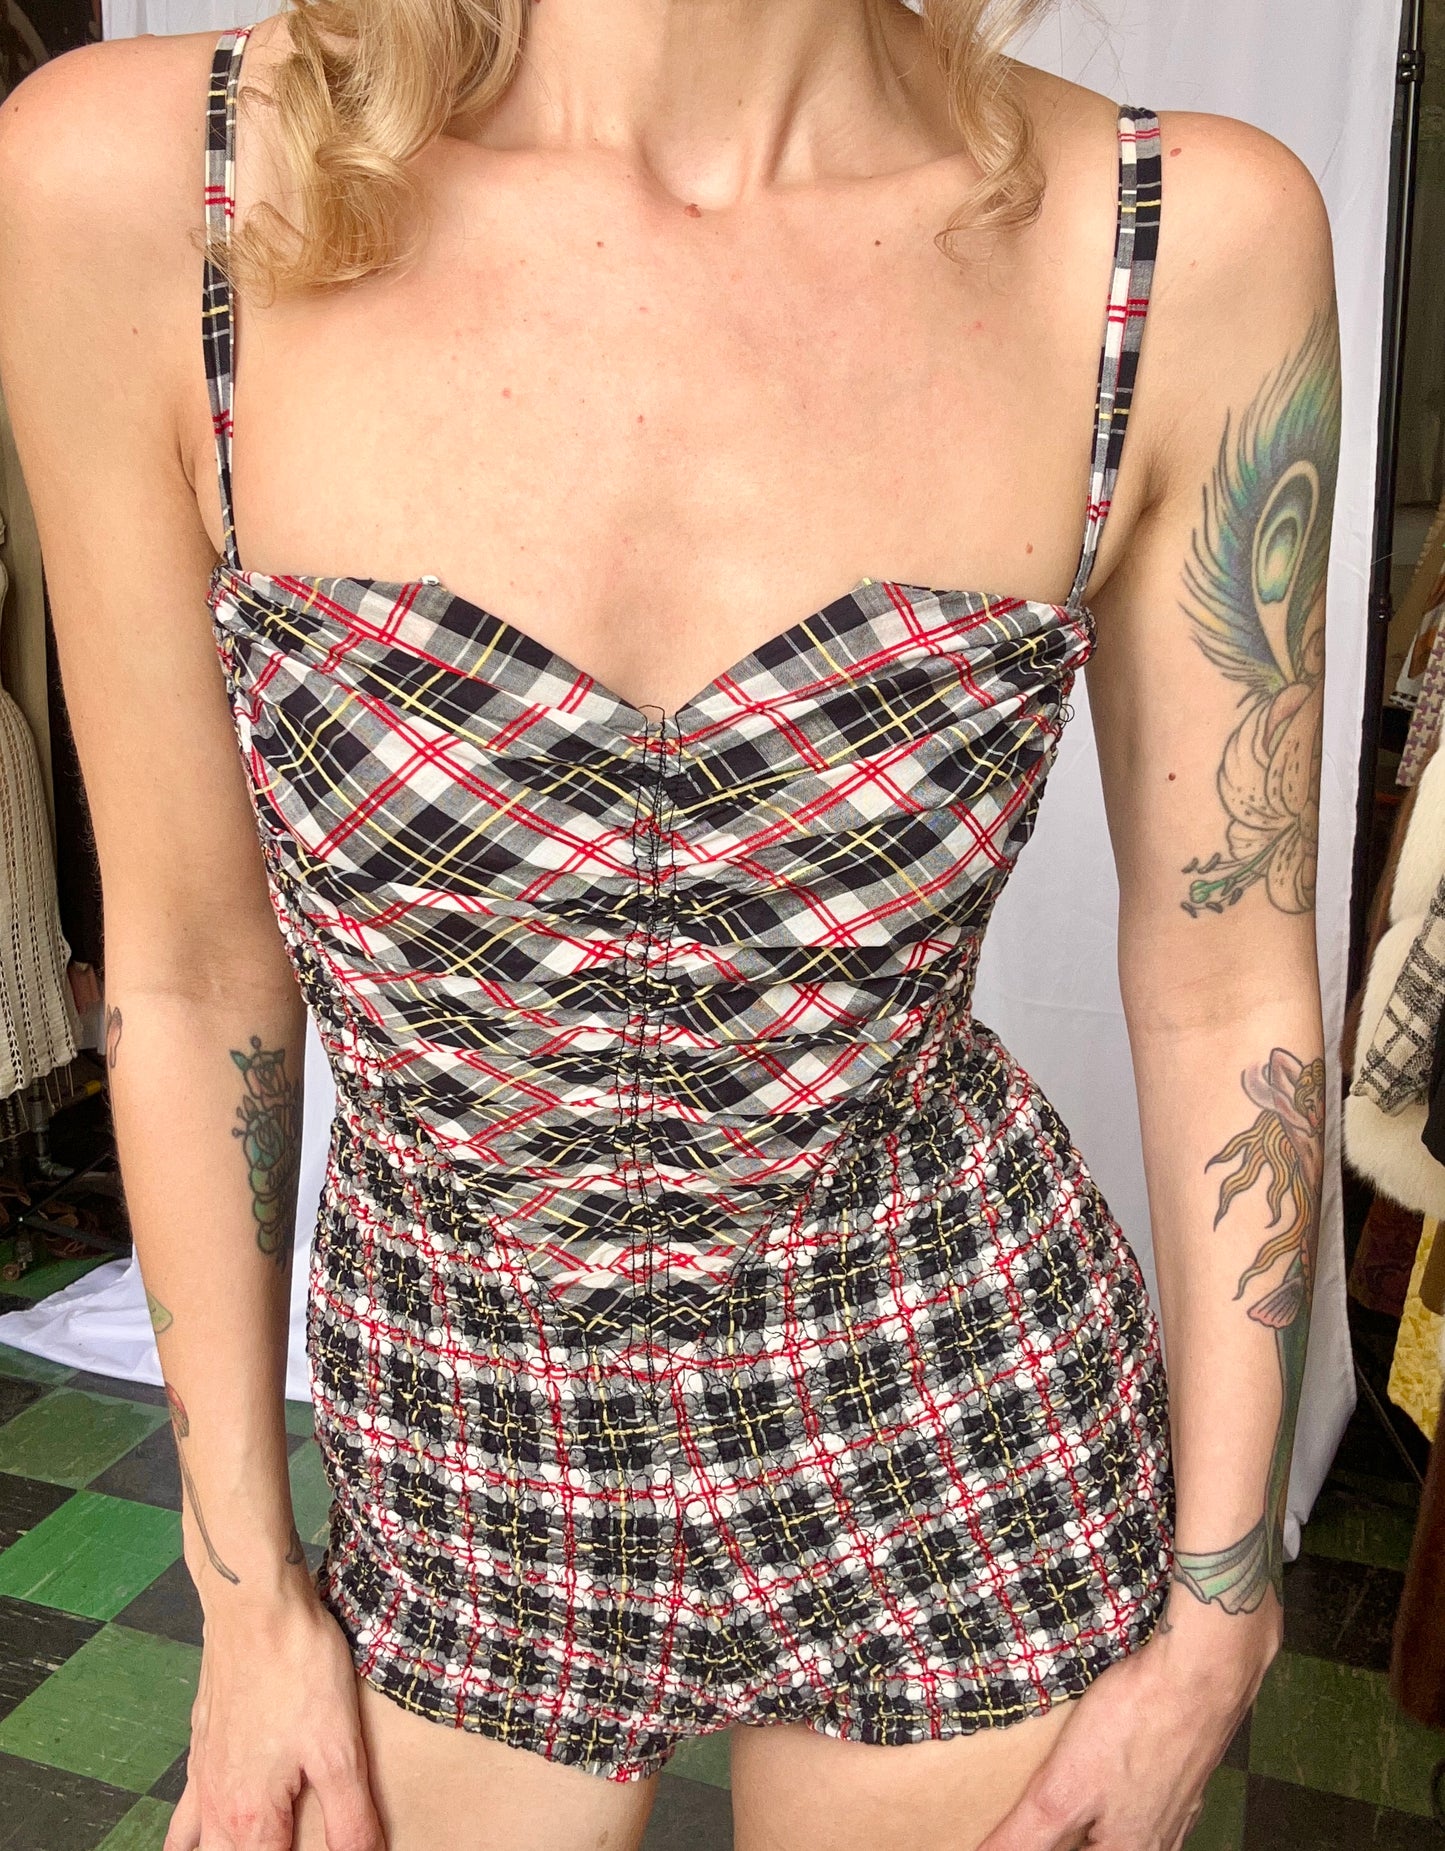 1950s Gingham Puckered Cotton Frances Sider Swimsuit - Small to Medium